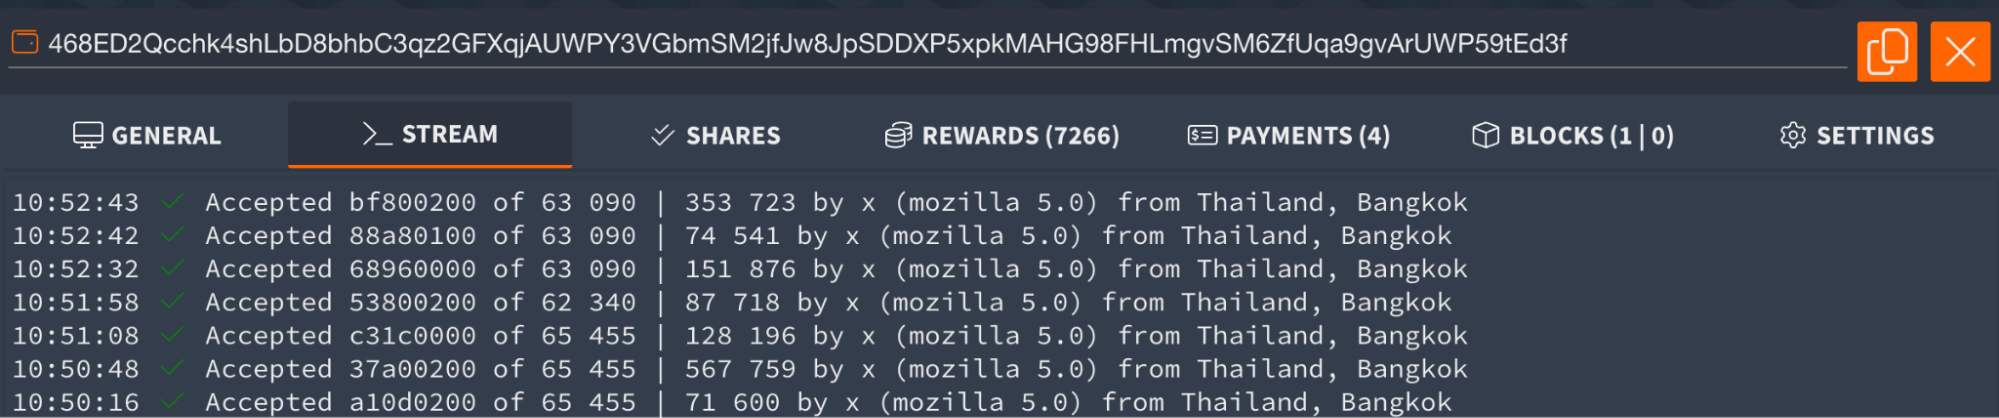 Miners actively connecting to the REF4578 Payment ID